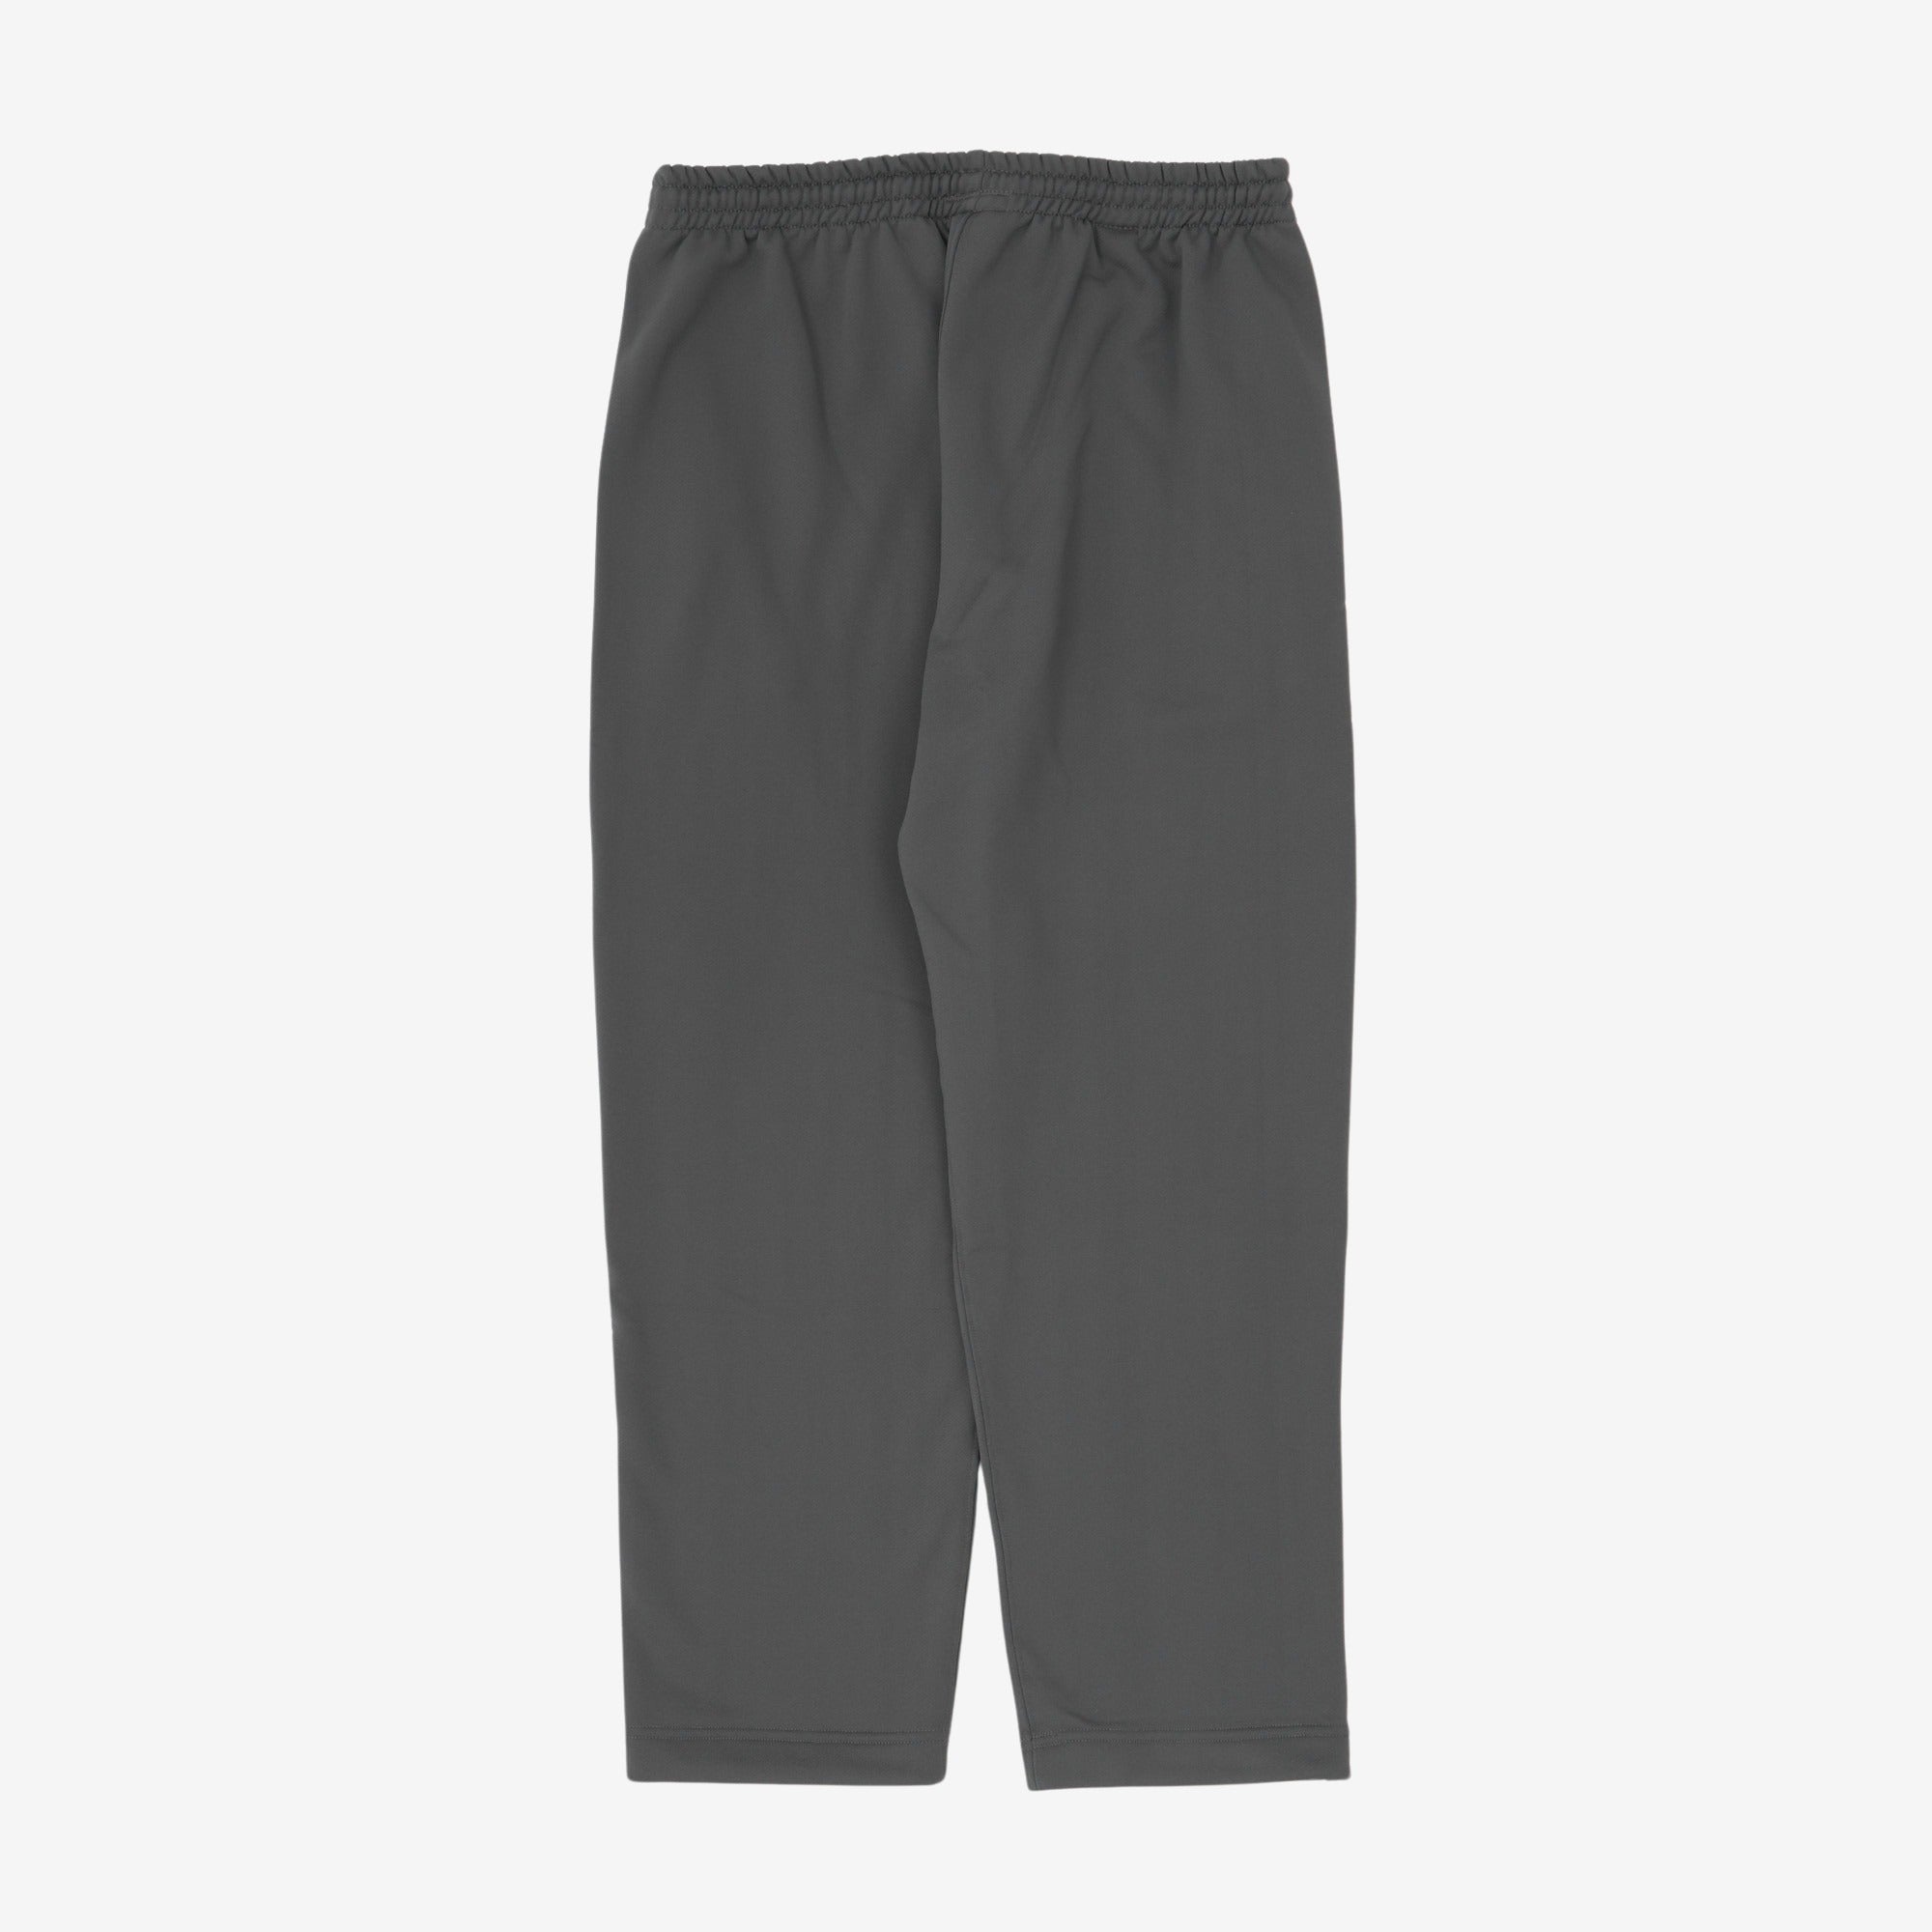 Super Weighted Sweatpants